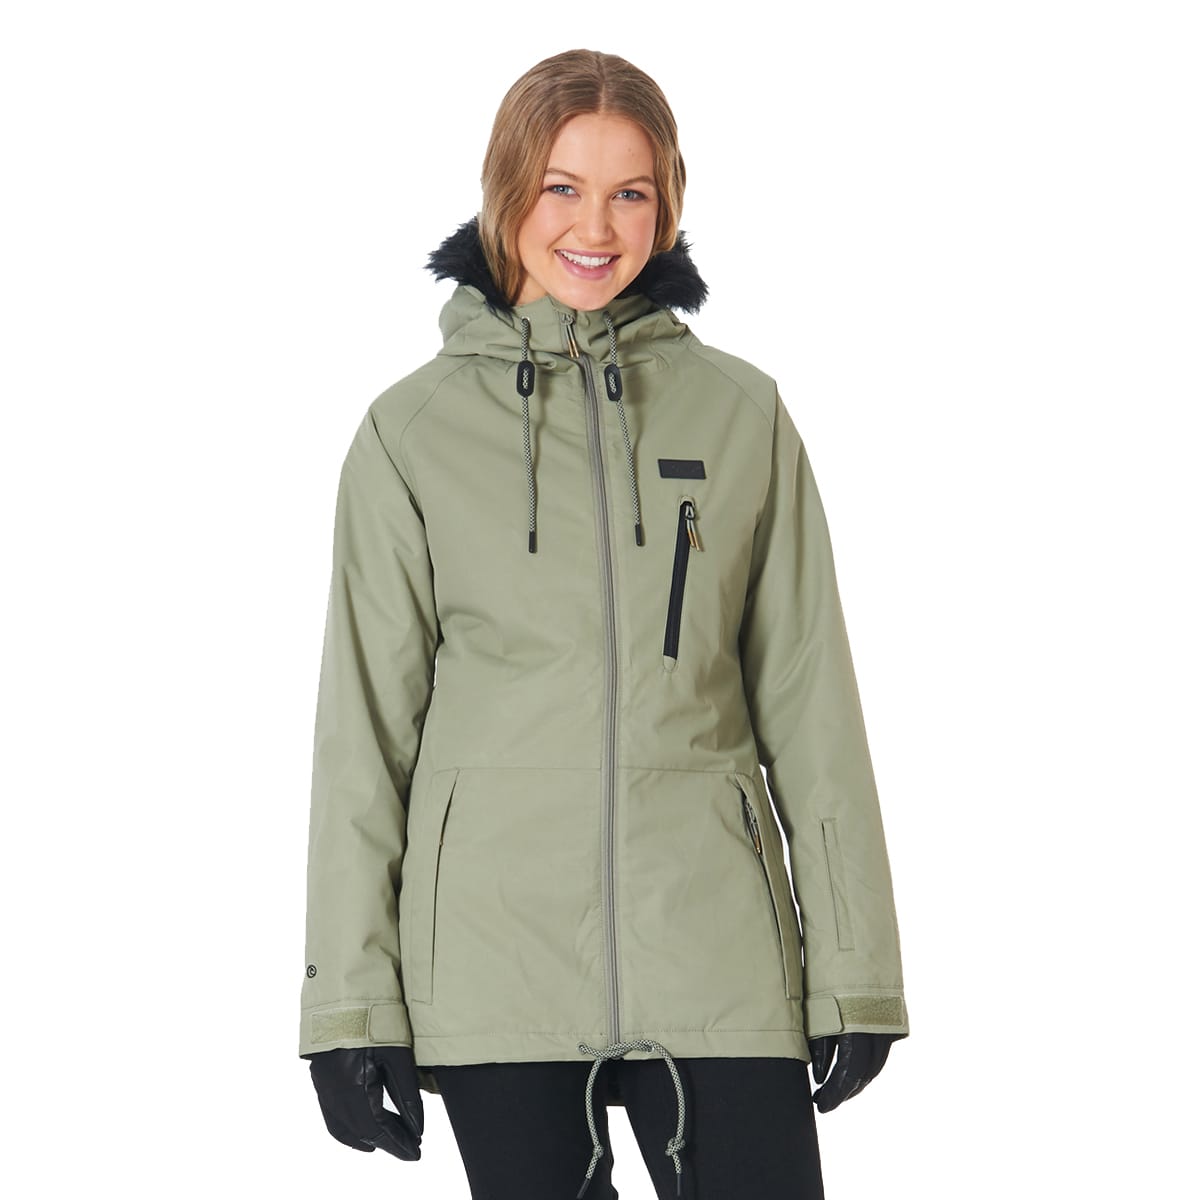 Buy Rip Curl Women's Annie Jacket from Outnorth.